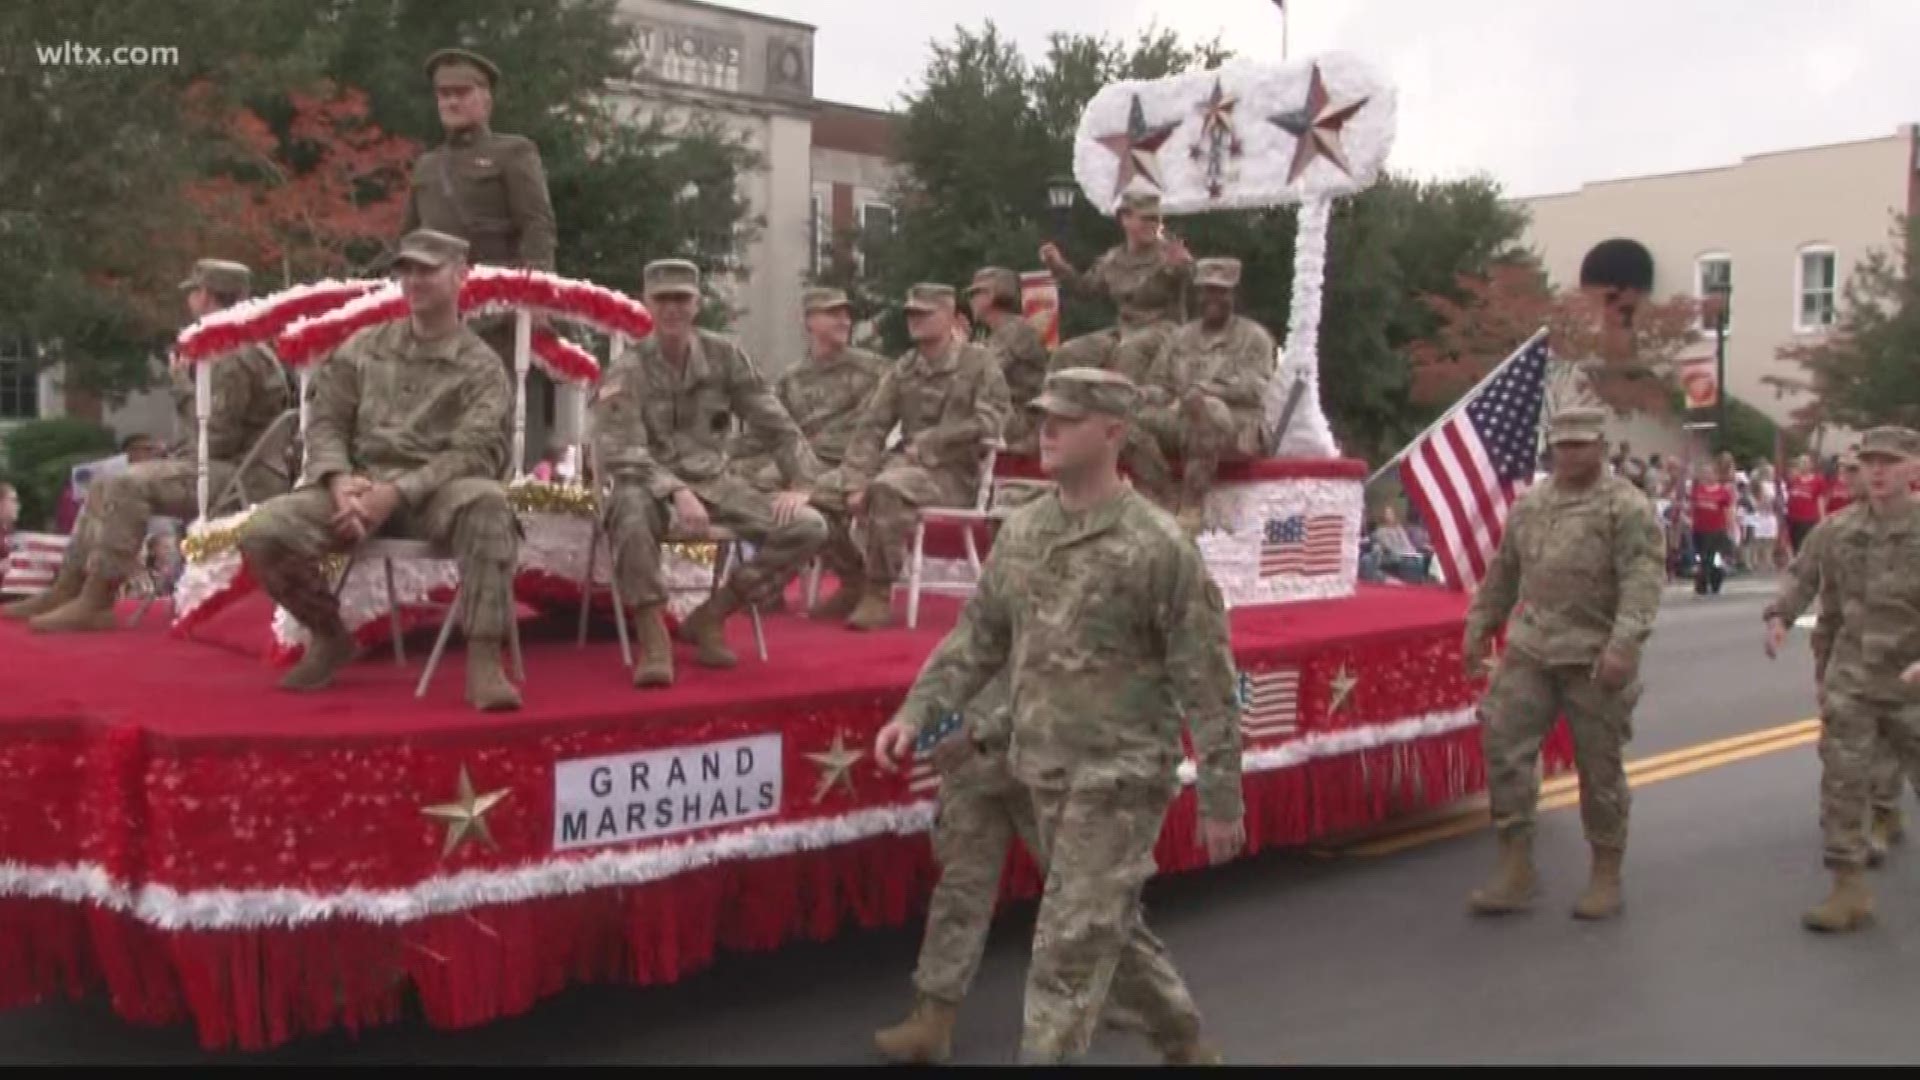 The town of Lexington, SC held its Veterans Day parade Sunday.